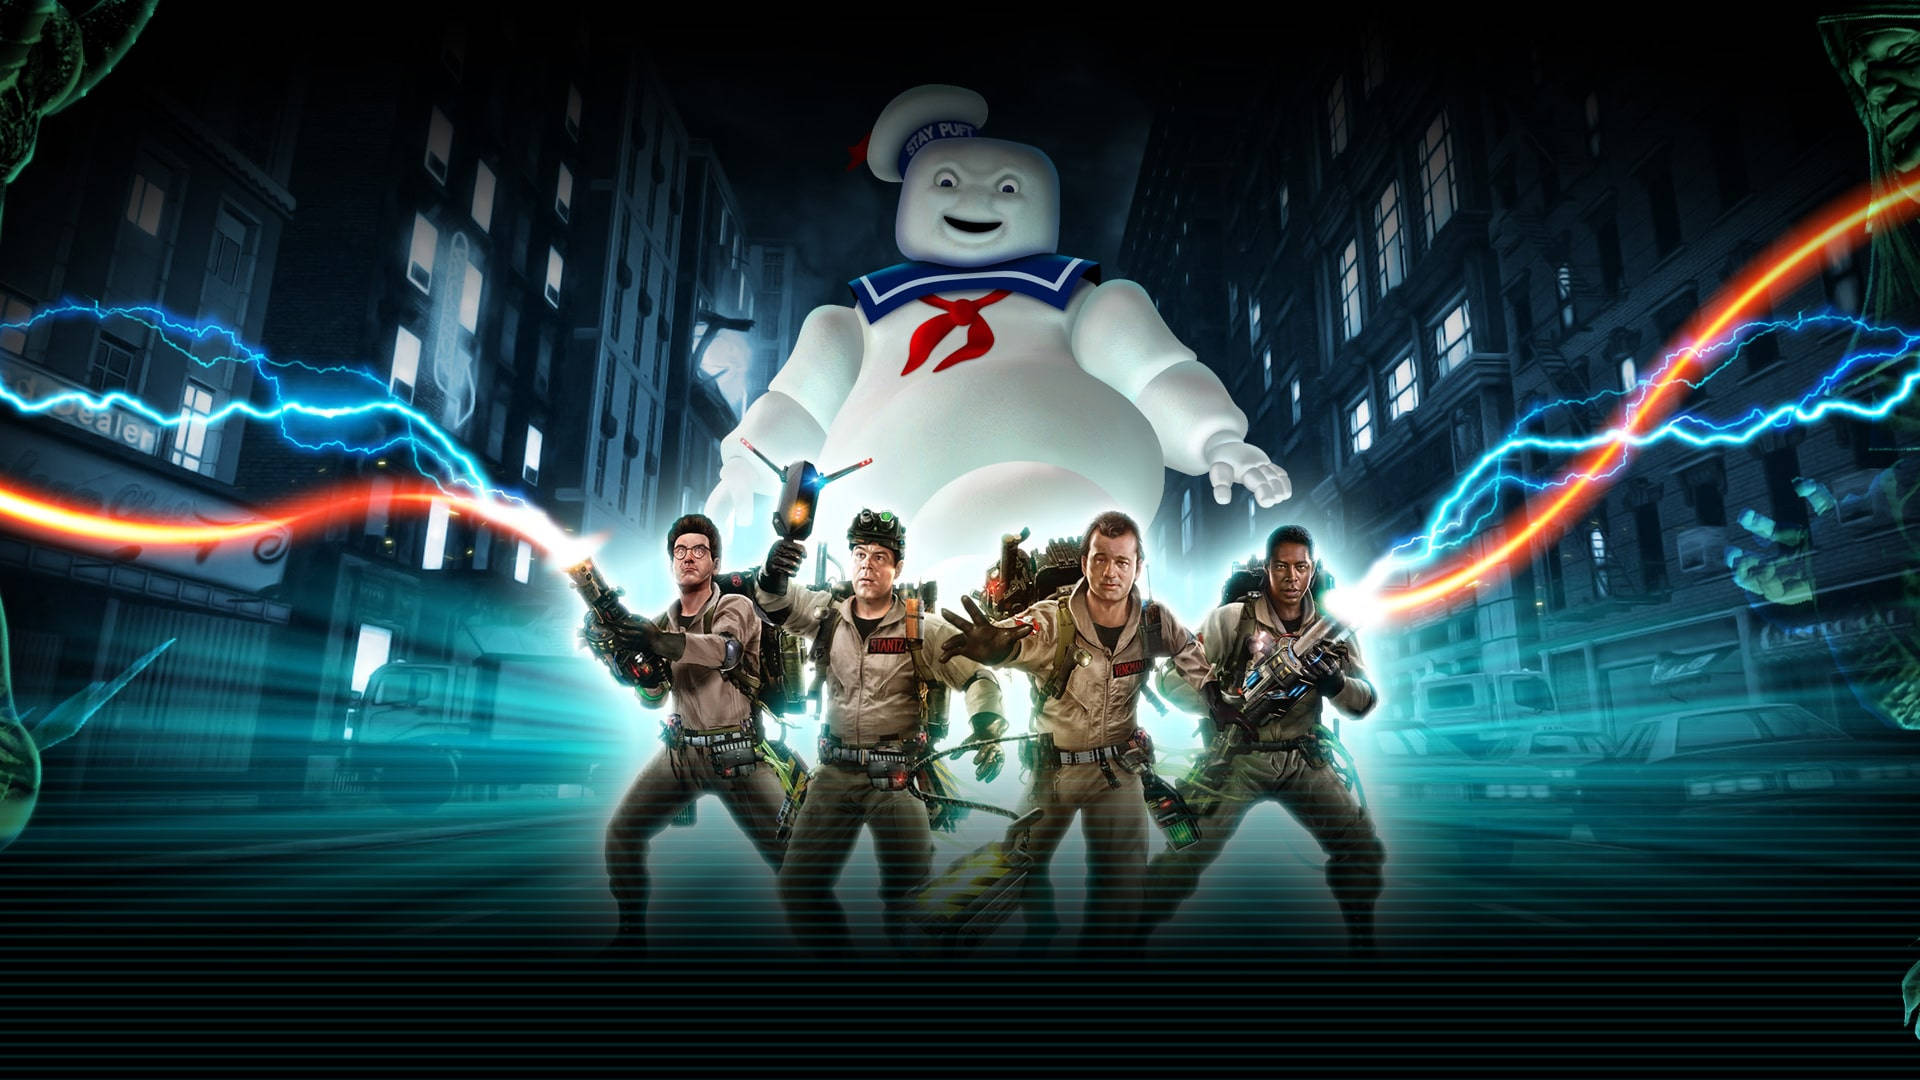 Stay Puft Marshmallow Man Causes Chaos In Ghostbusters Background